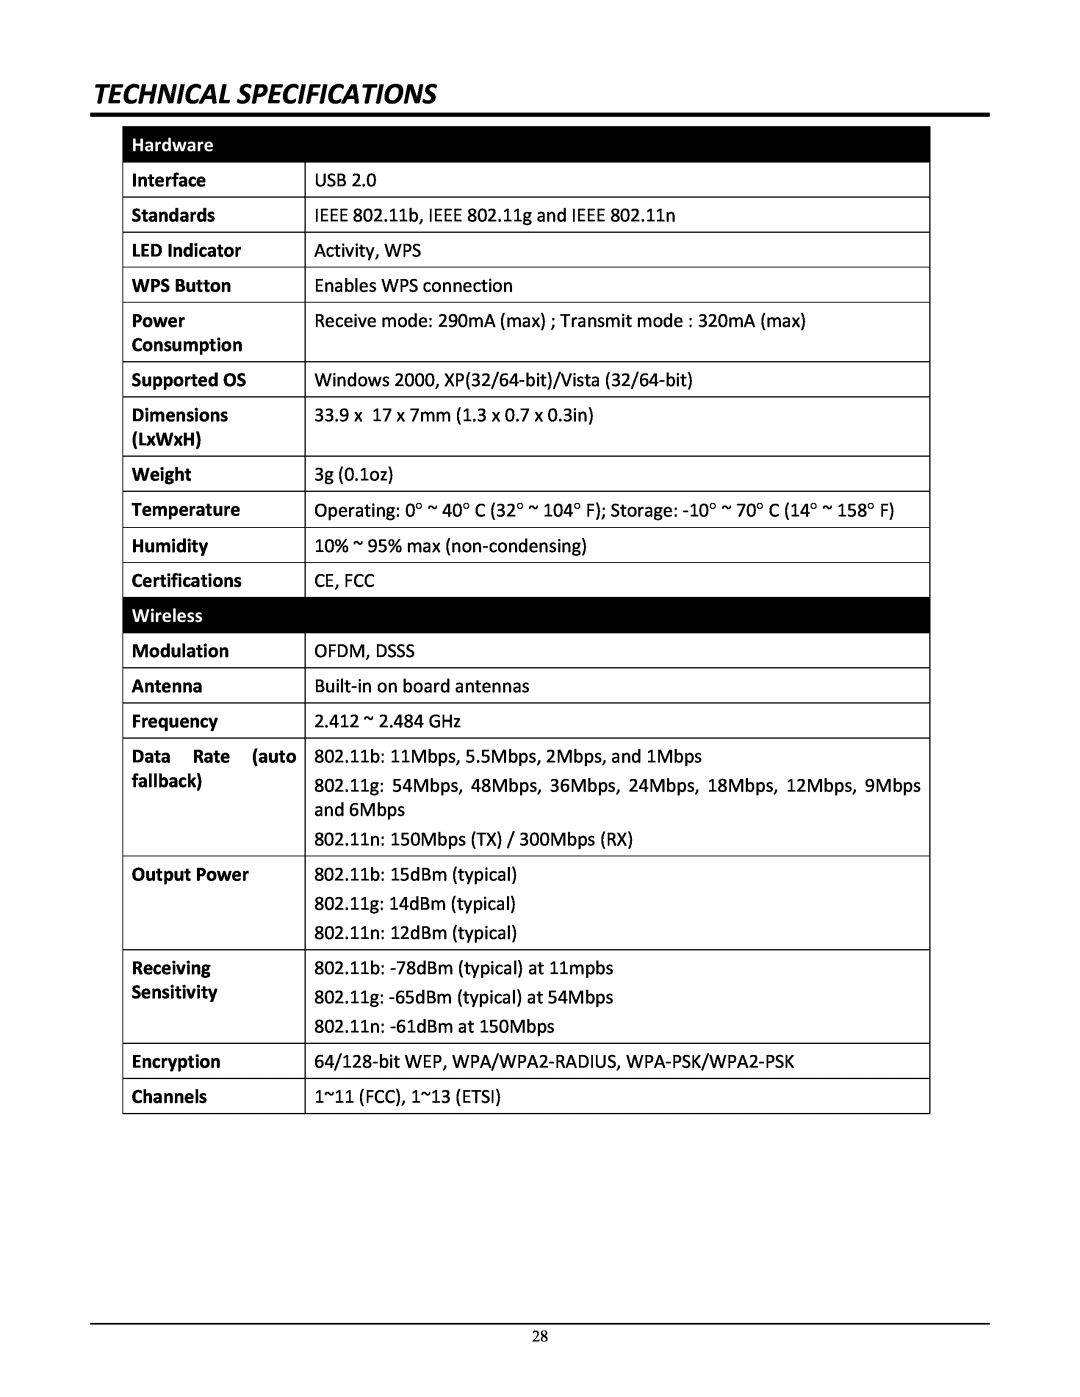 TRENDnet TEW-649UB manual Technical Specifications, Hardware, Wireless 